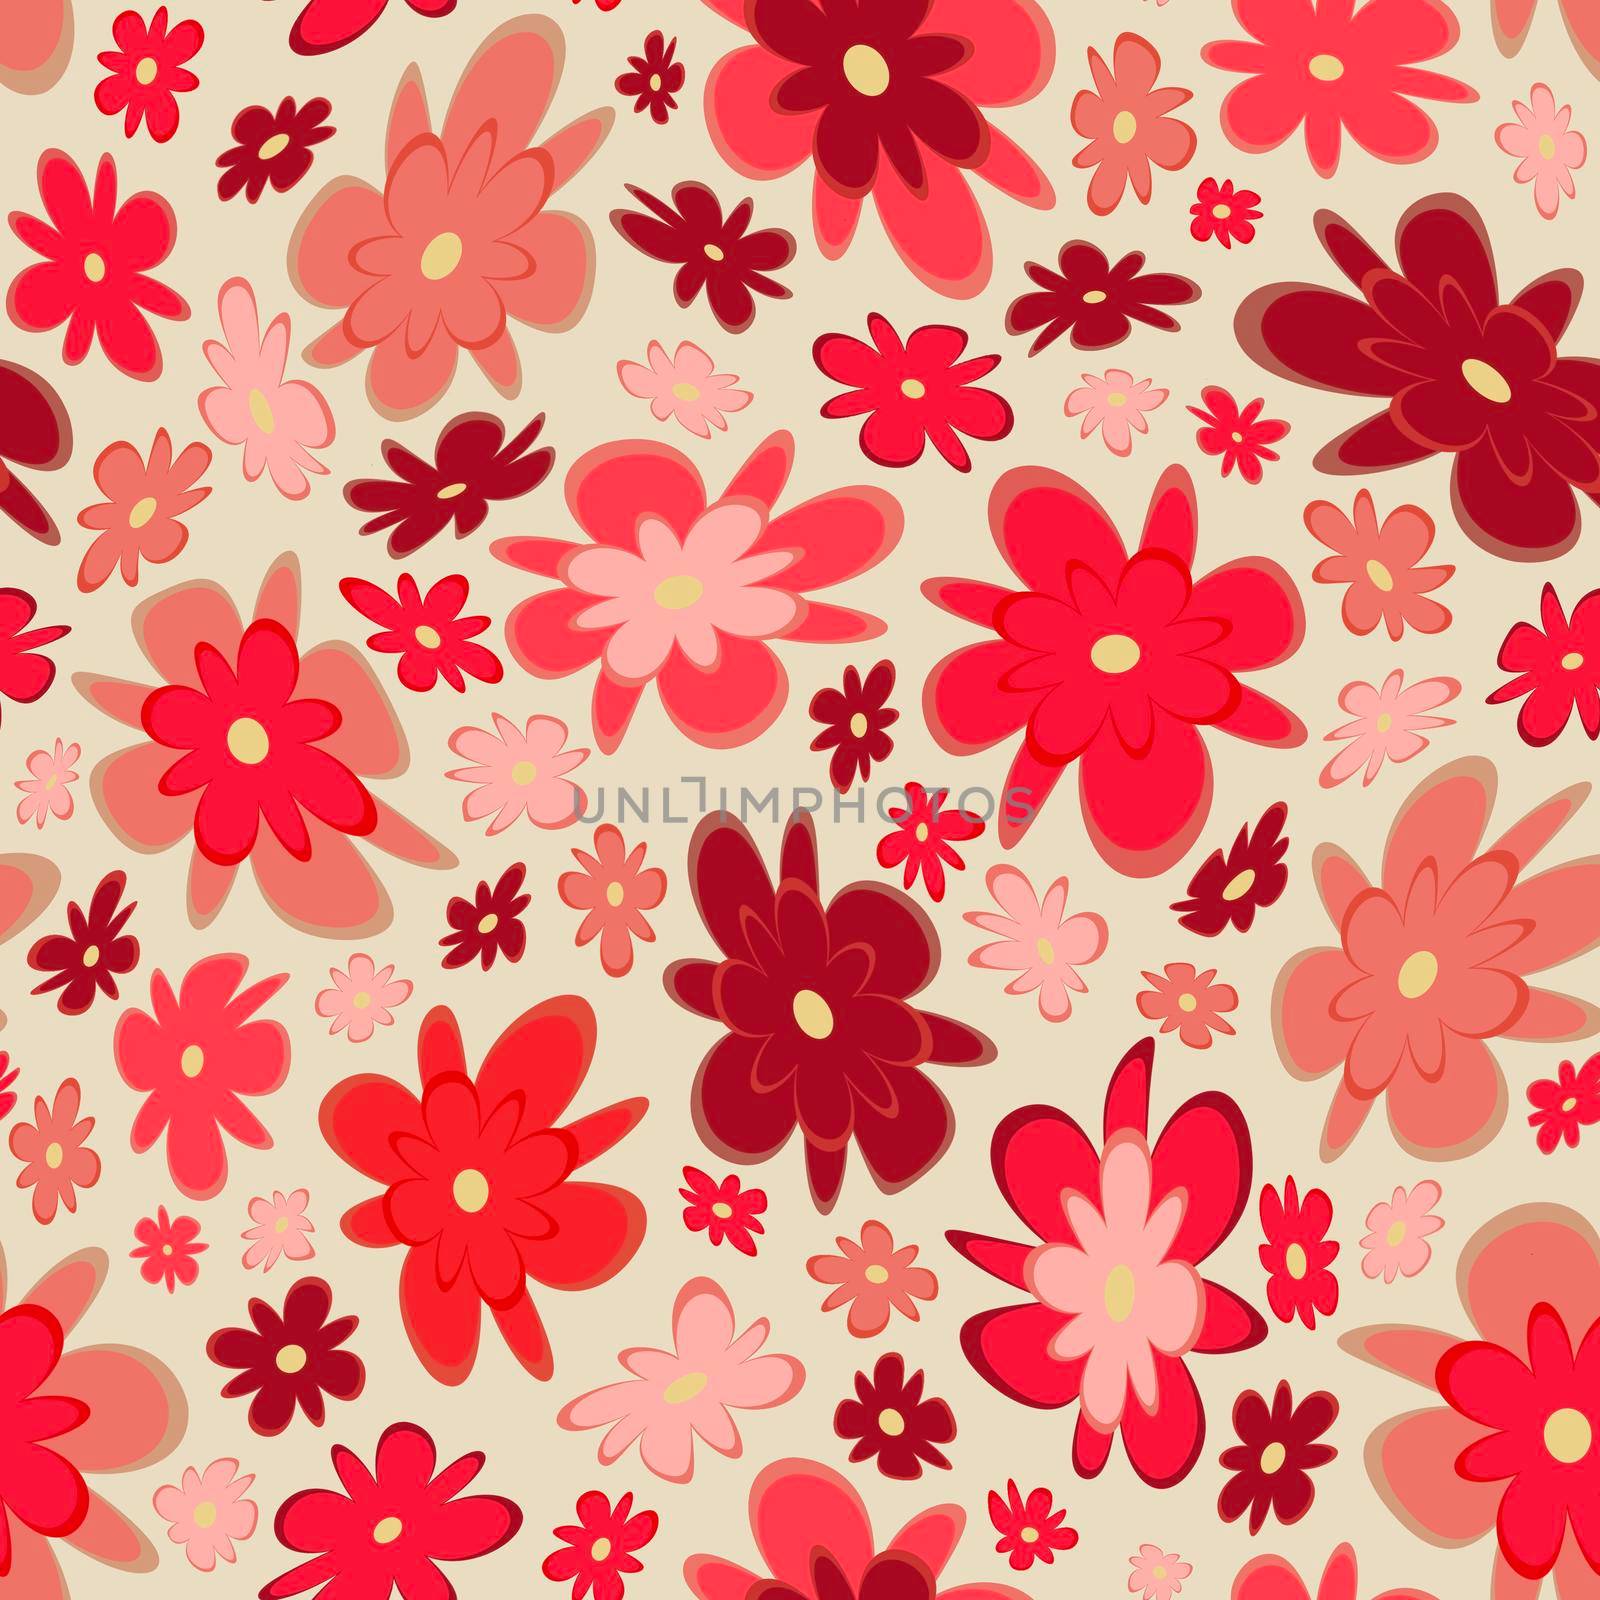 Trendy fabric pattern with miniature flowers.Summer print.Fashion design.Motifs scattered random.Elegant template for fashion prints.Good for fashion,textile,fabric,gift wrapping paper.Coral on pink.